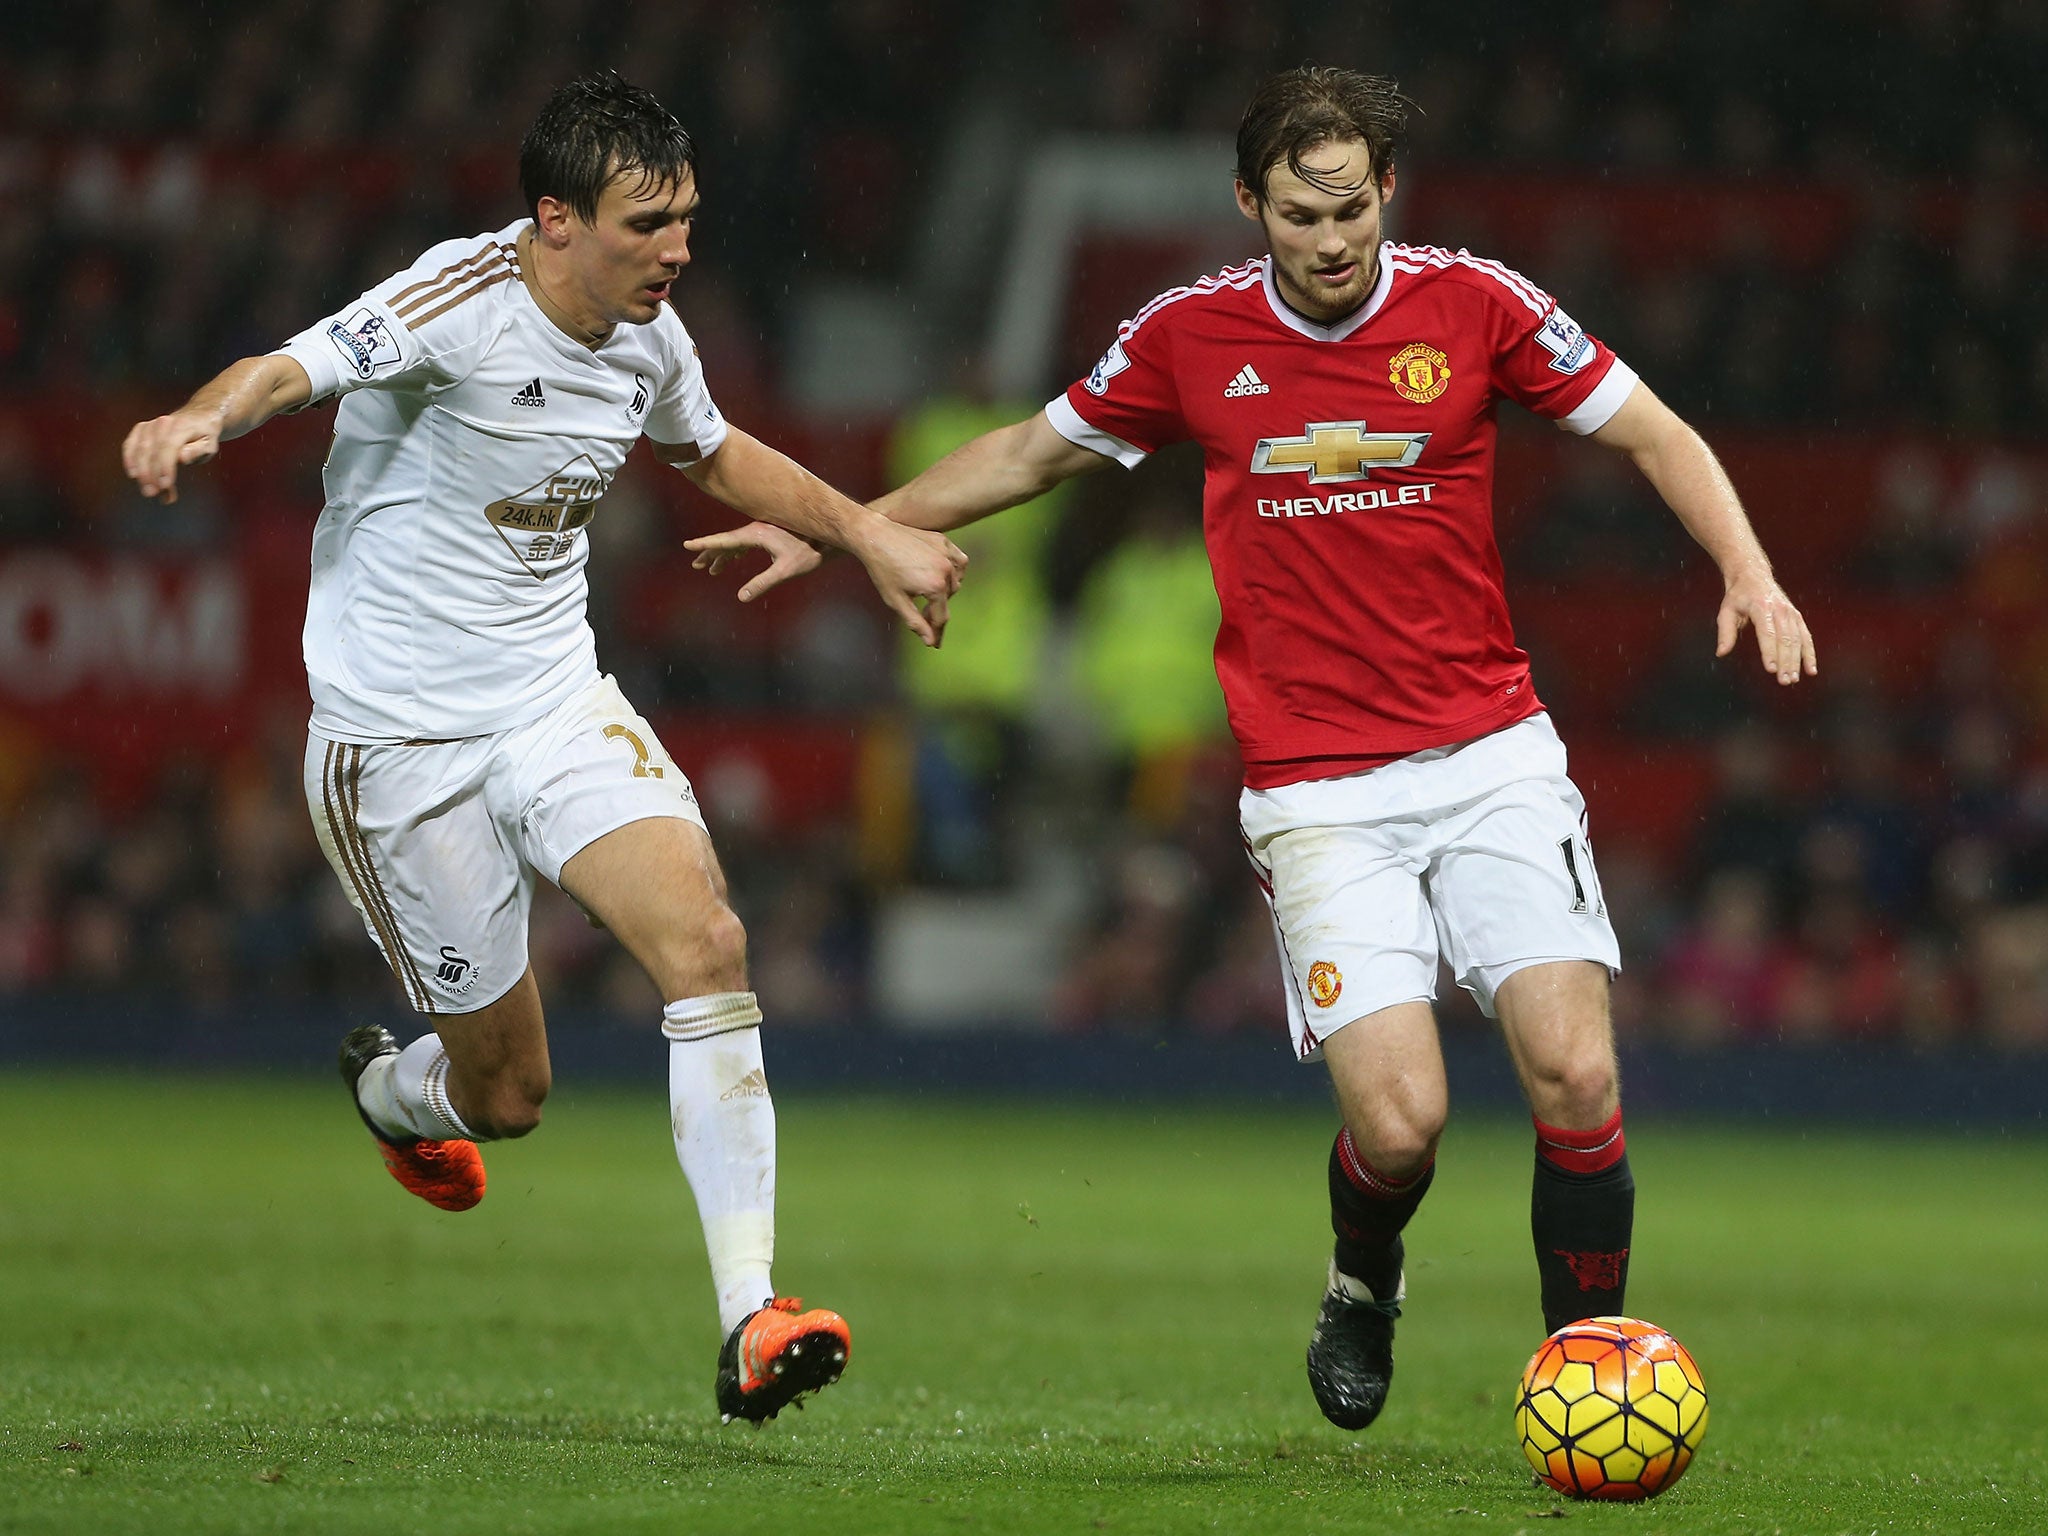 Manchester United take on Swansea at the Liberty Stadium